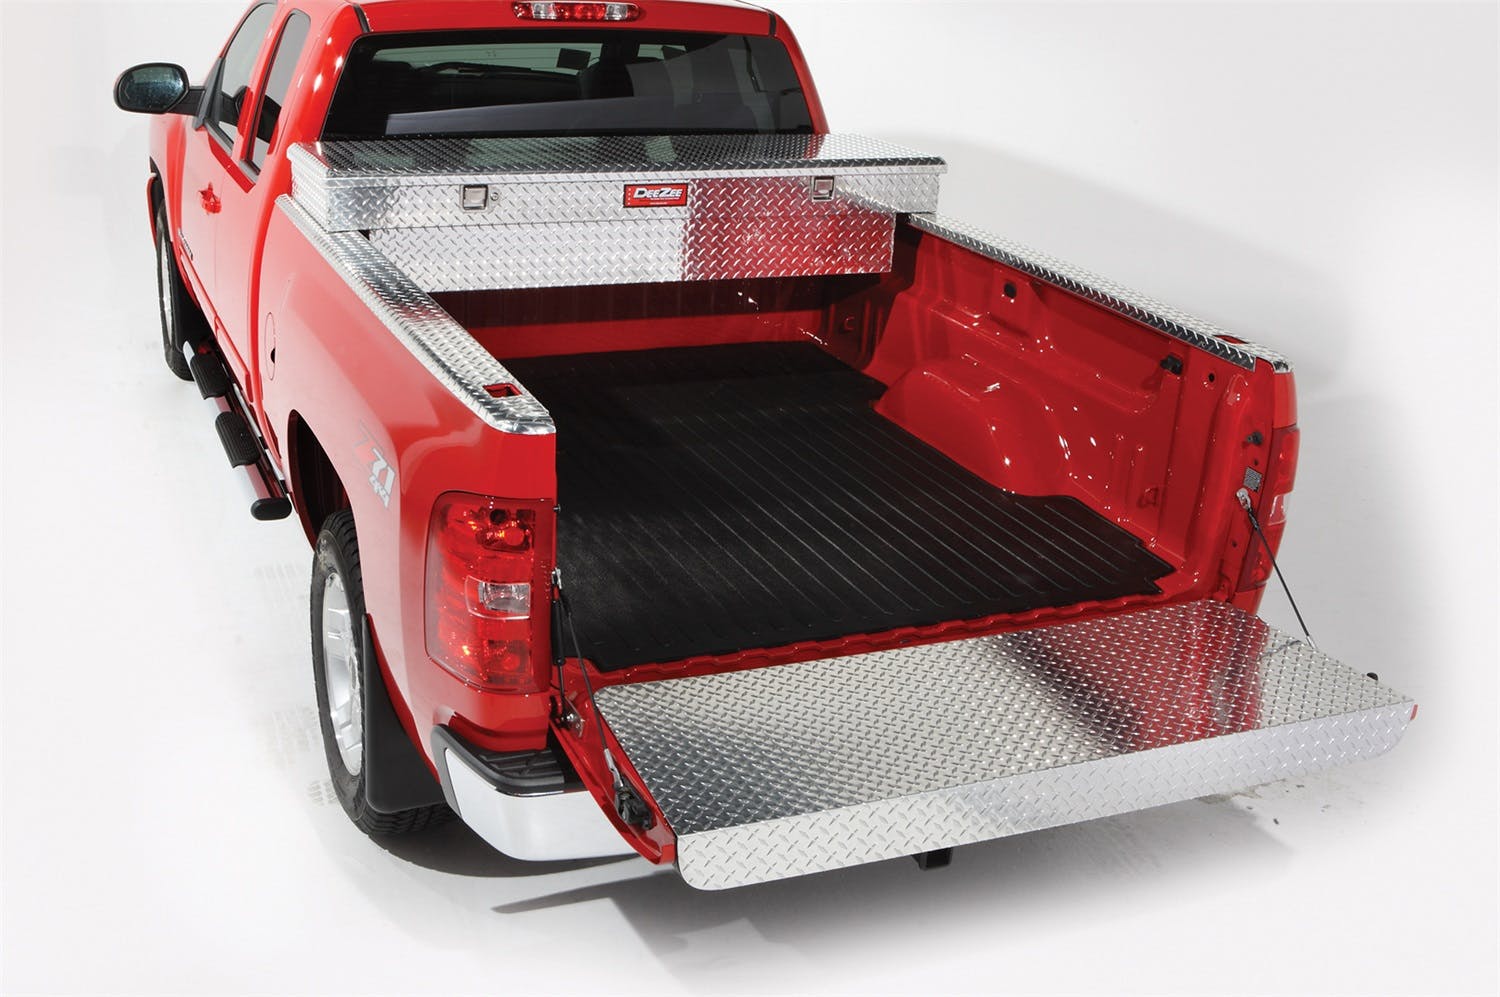 DeeZee Truck Accessories - Tailgate Assist, Toolboxes, Headache